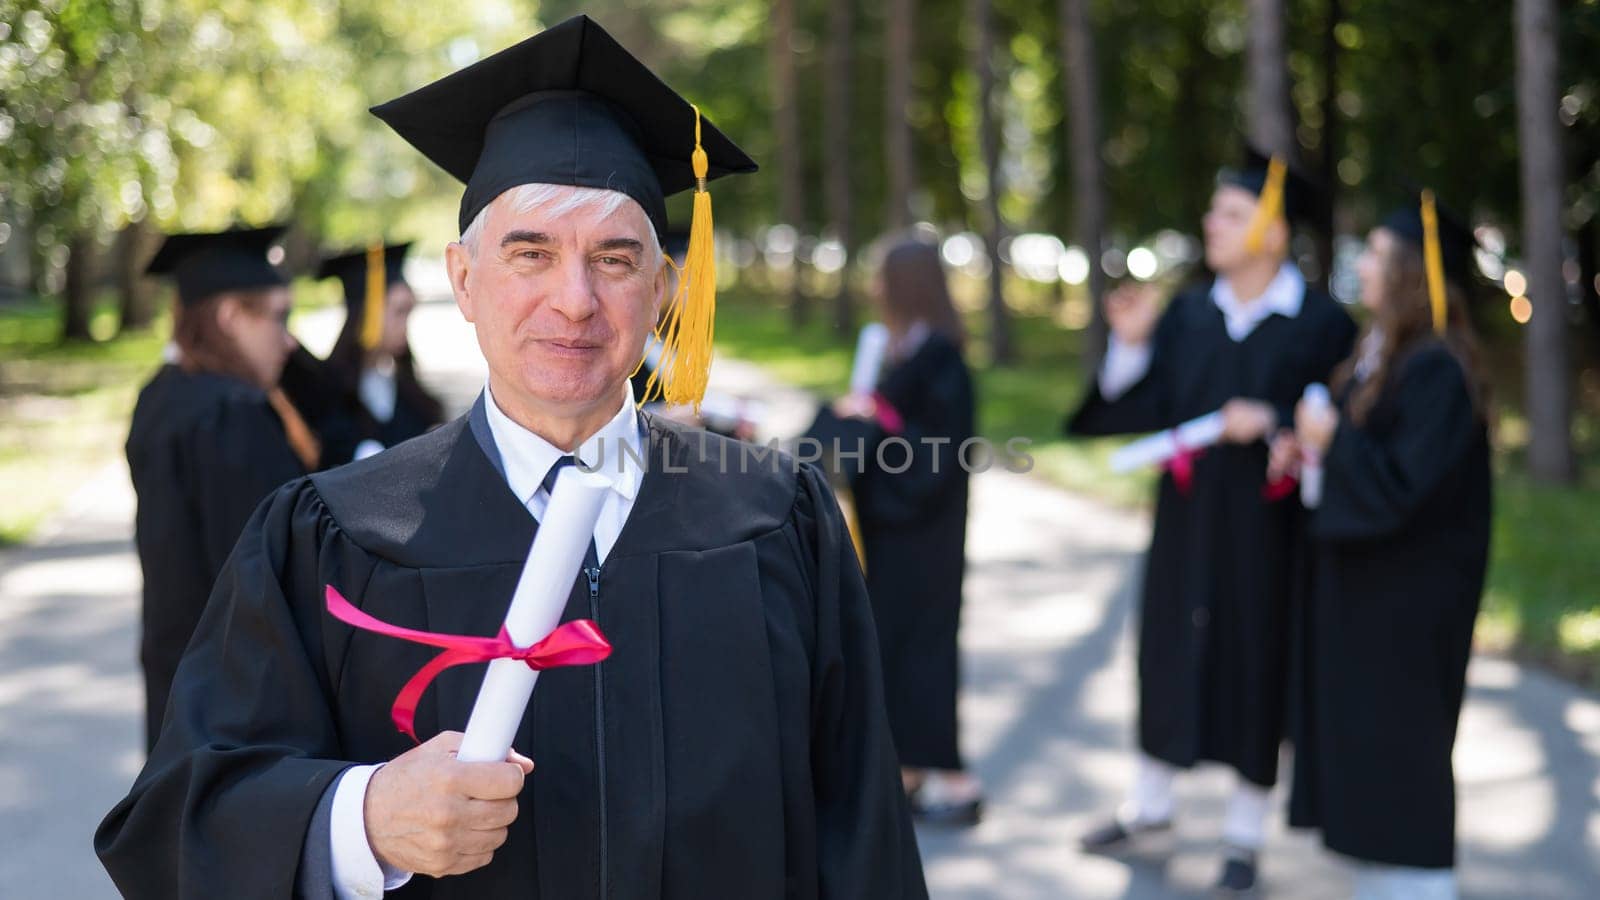 A group of graduates in robes outdoors. An elderly student rejoices at receiving a diploma. by mrwed54